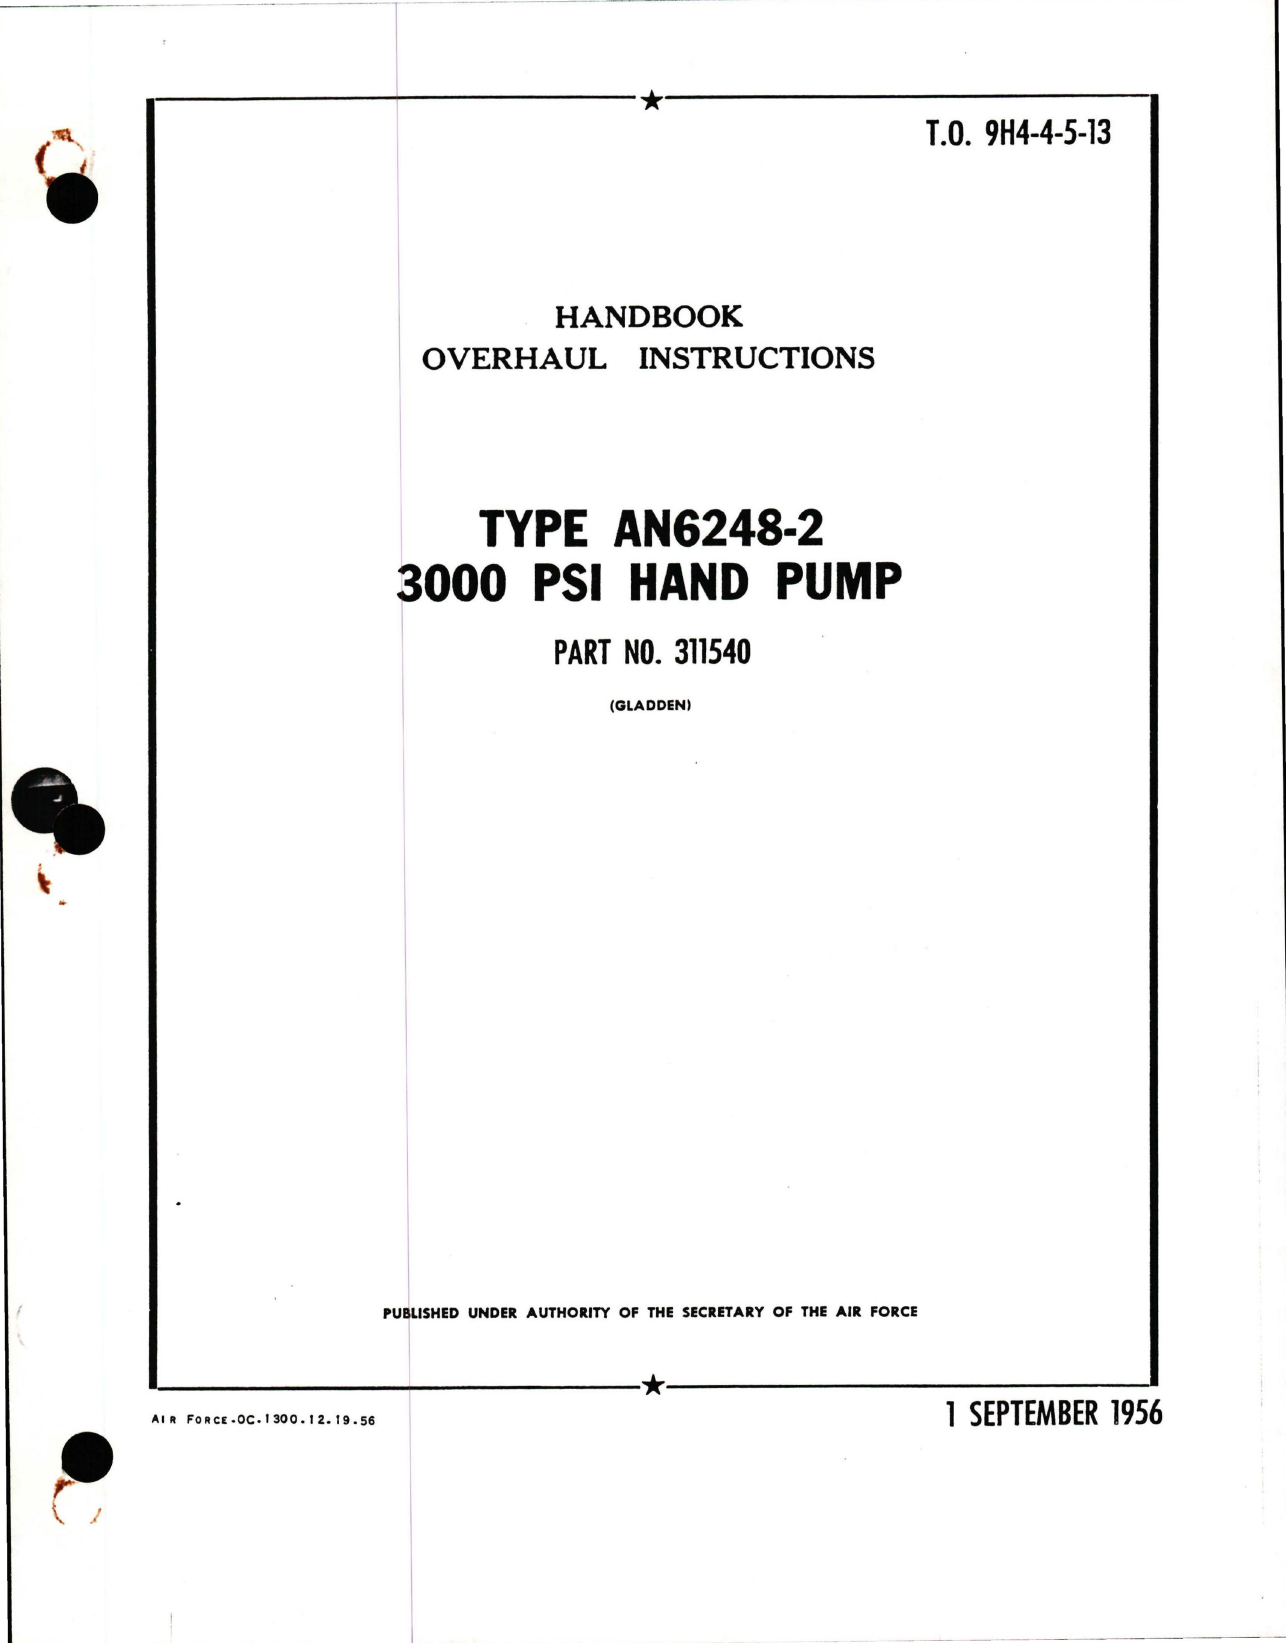 Sample page 1 from AirCorps Library document: Overhaul Instructions for Hand Pump - 3000 PSI  - Type AN6248-2 - Part 311540 